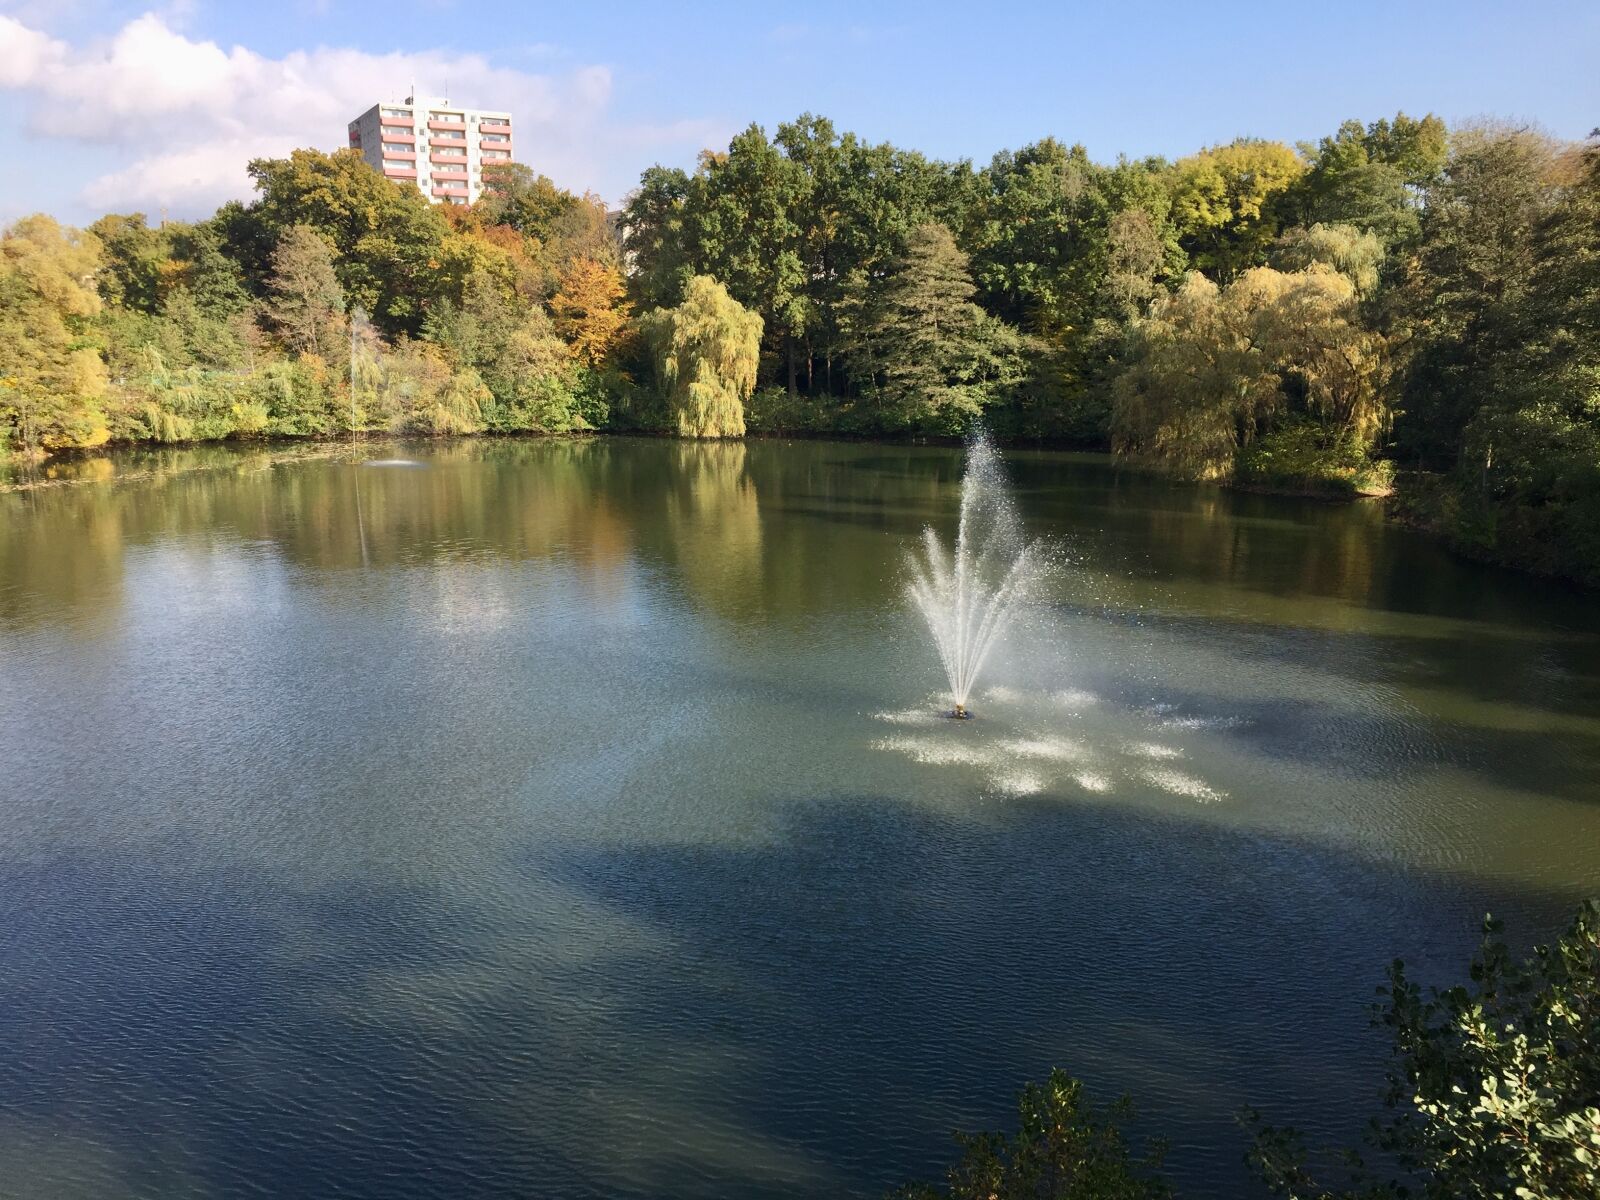 Apple iPhone 6 + iPhone 6 back camera 4.15mm f/2.2 sample photo. Water, autumn, autumn-appearance photography